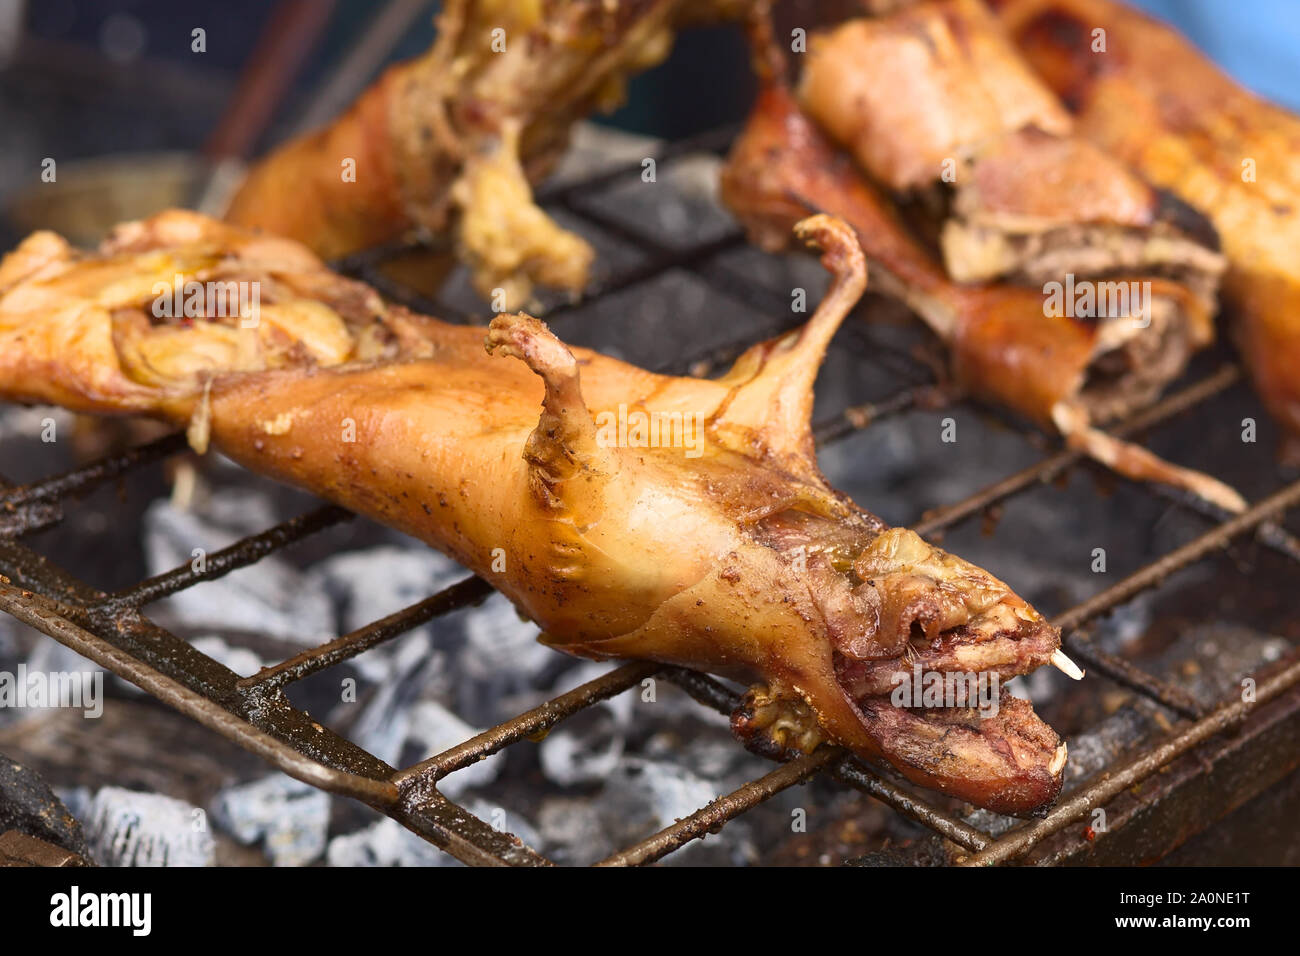 BANOS, ECUADOR - FEBRUARY 28, 2014: Guinea pigs being barbecued for sale on Ambato Street at the market hall on February 28, 2014 in Banos, Ecuador Stock Photo